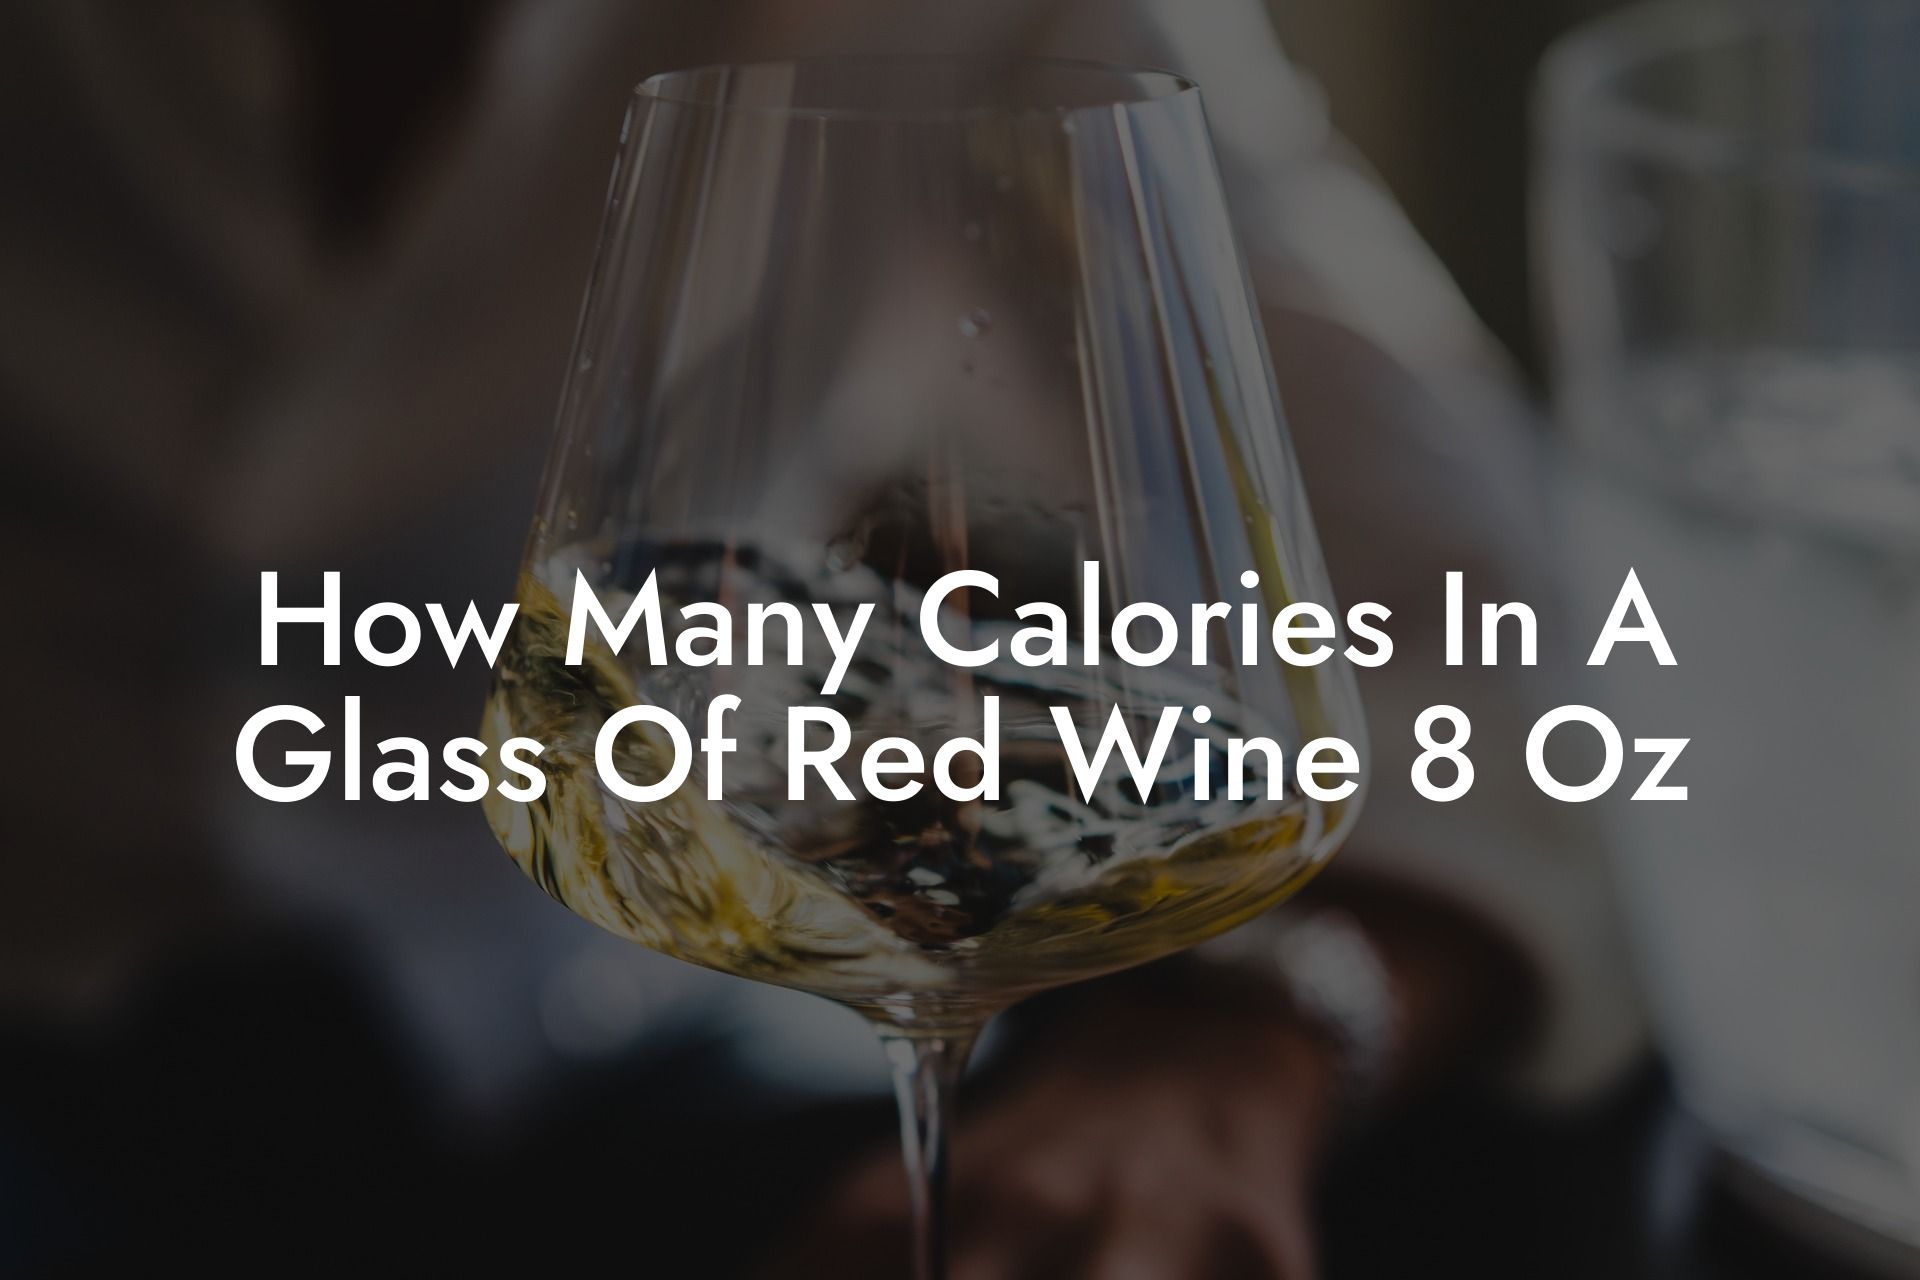 How Many Calories In A Glass Of Red Wine 8 Oz